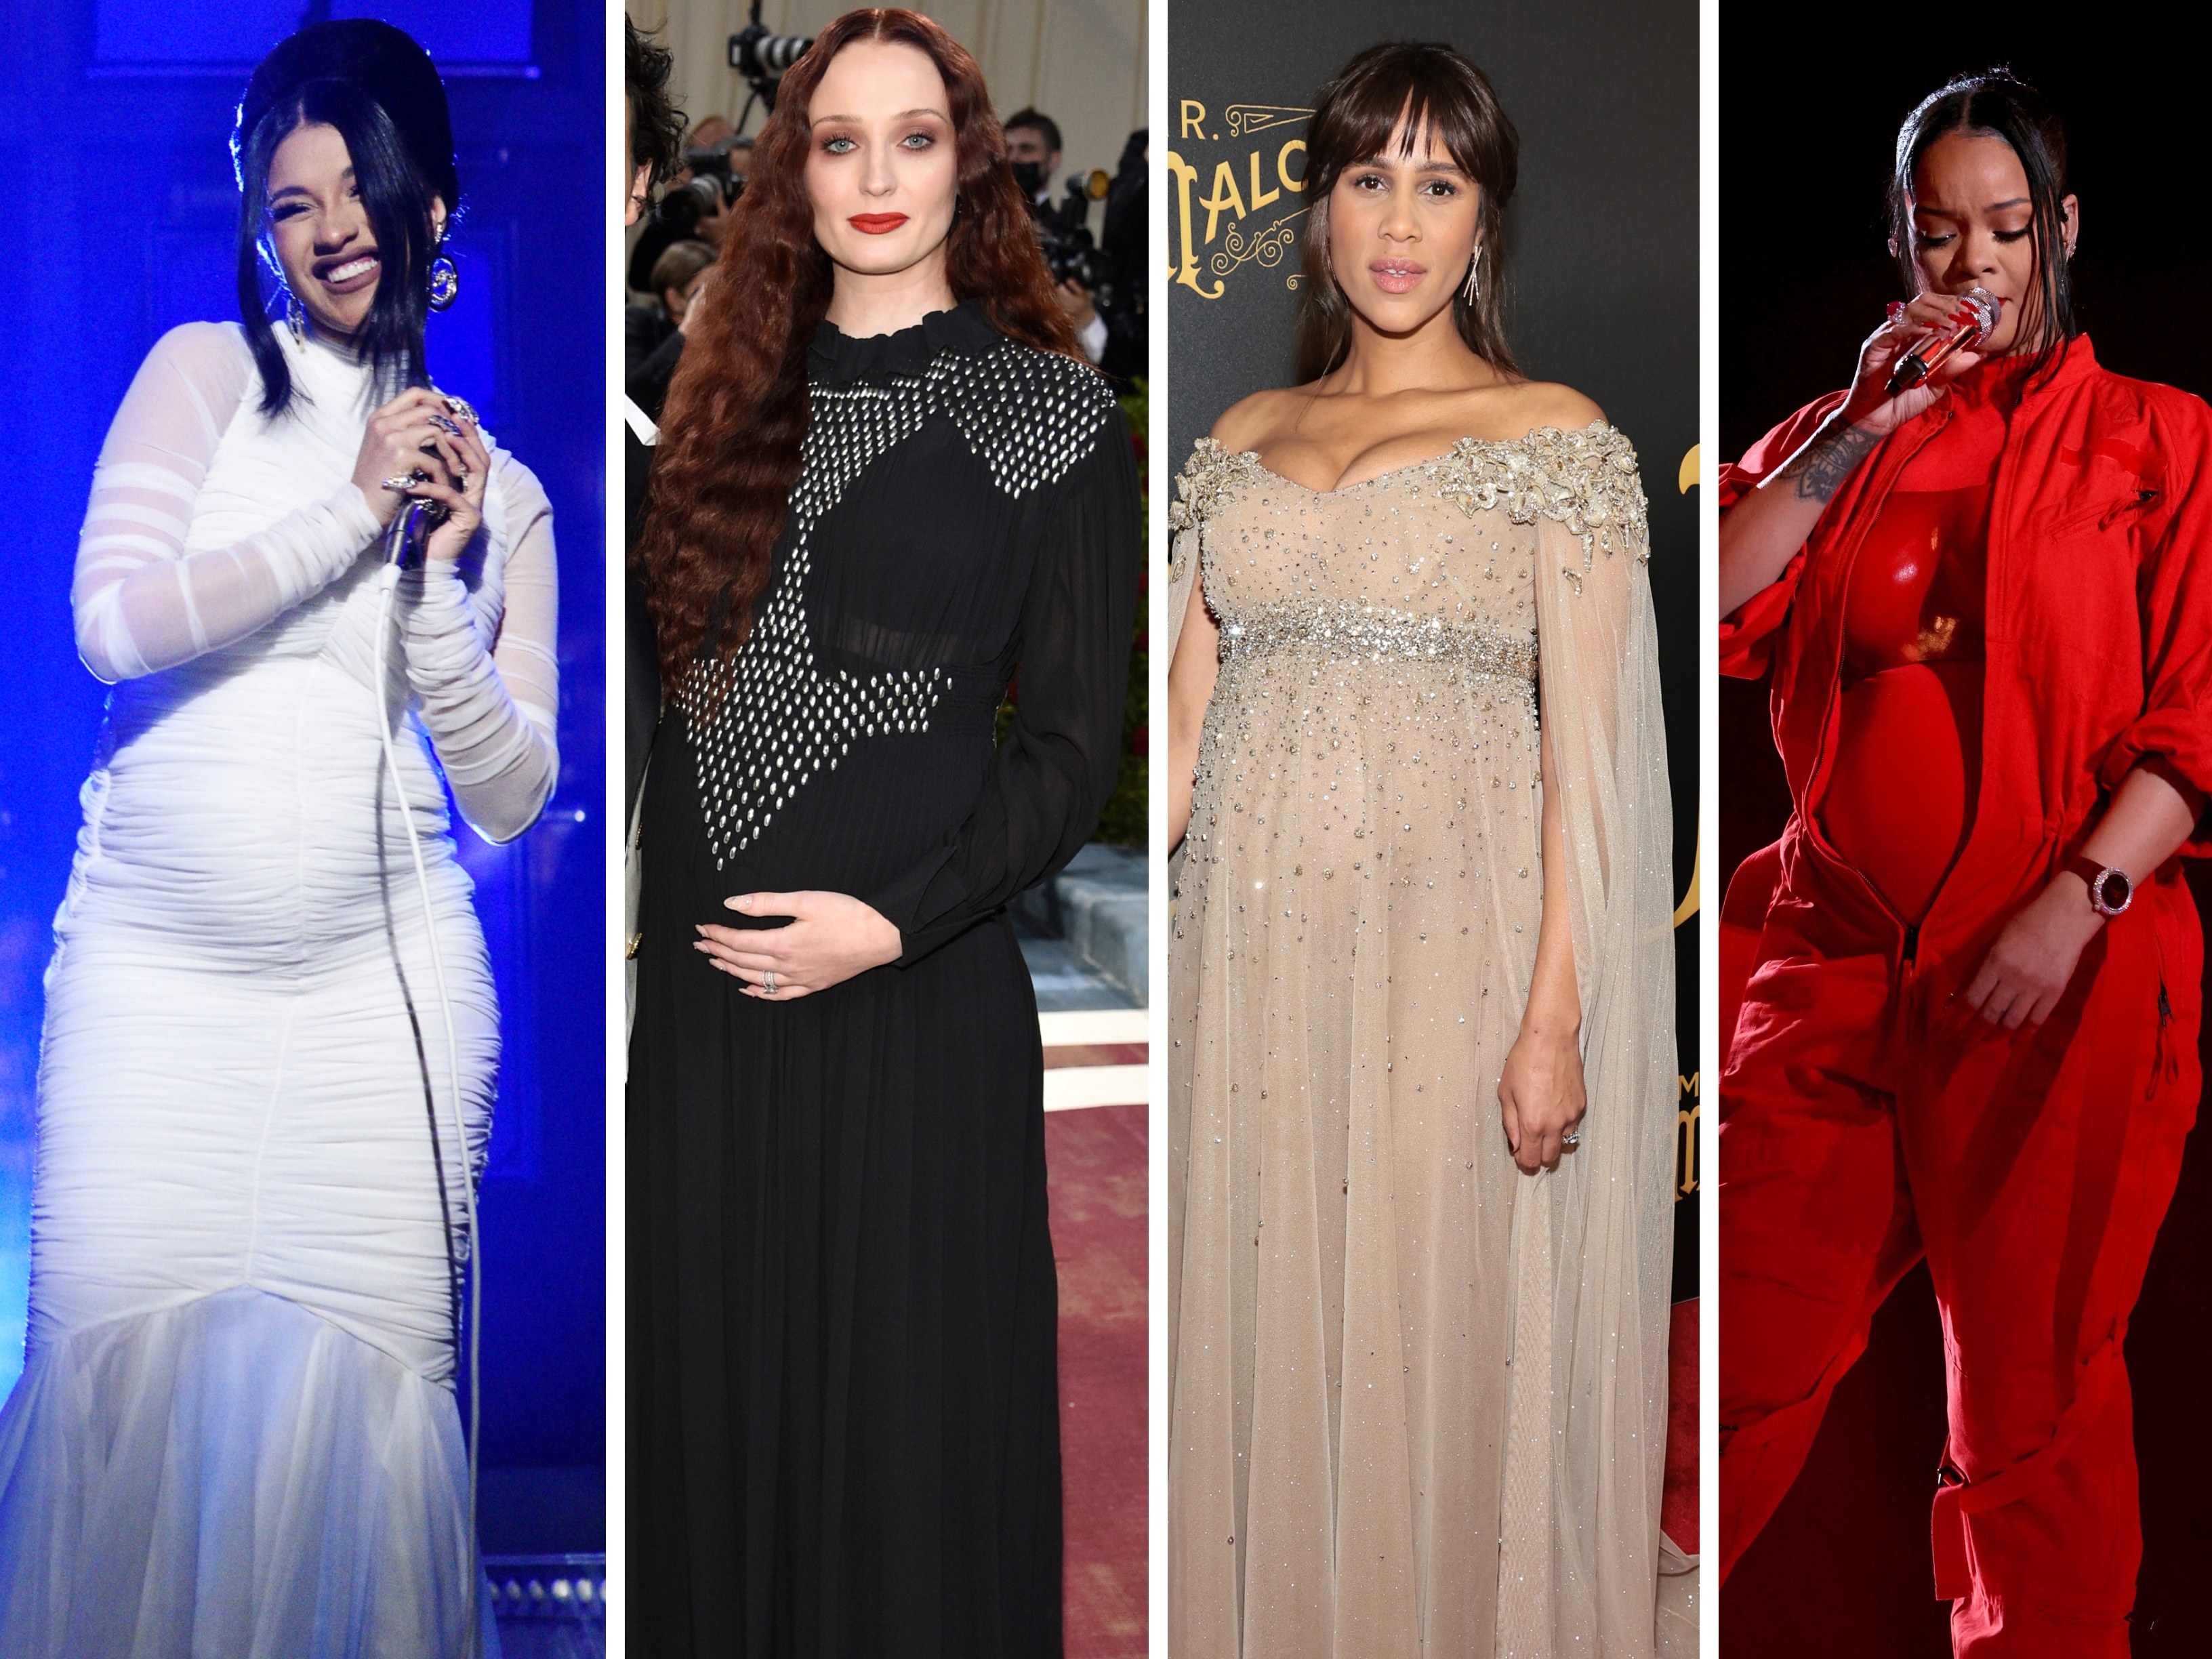 Cardi B, Sophie Turner, Zawe Ashton and Rihanna all donned stunning looks to reveal their pregnancy news. Photos: Getty Images